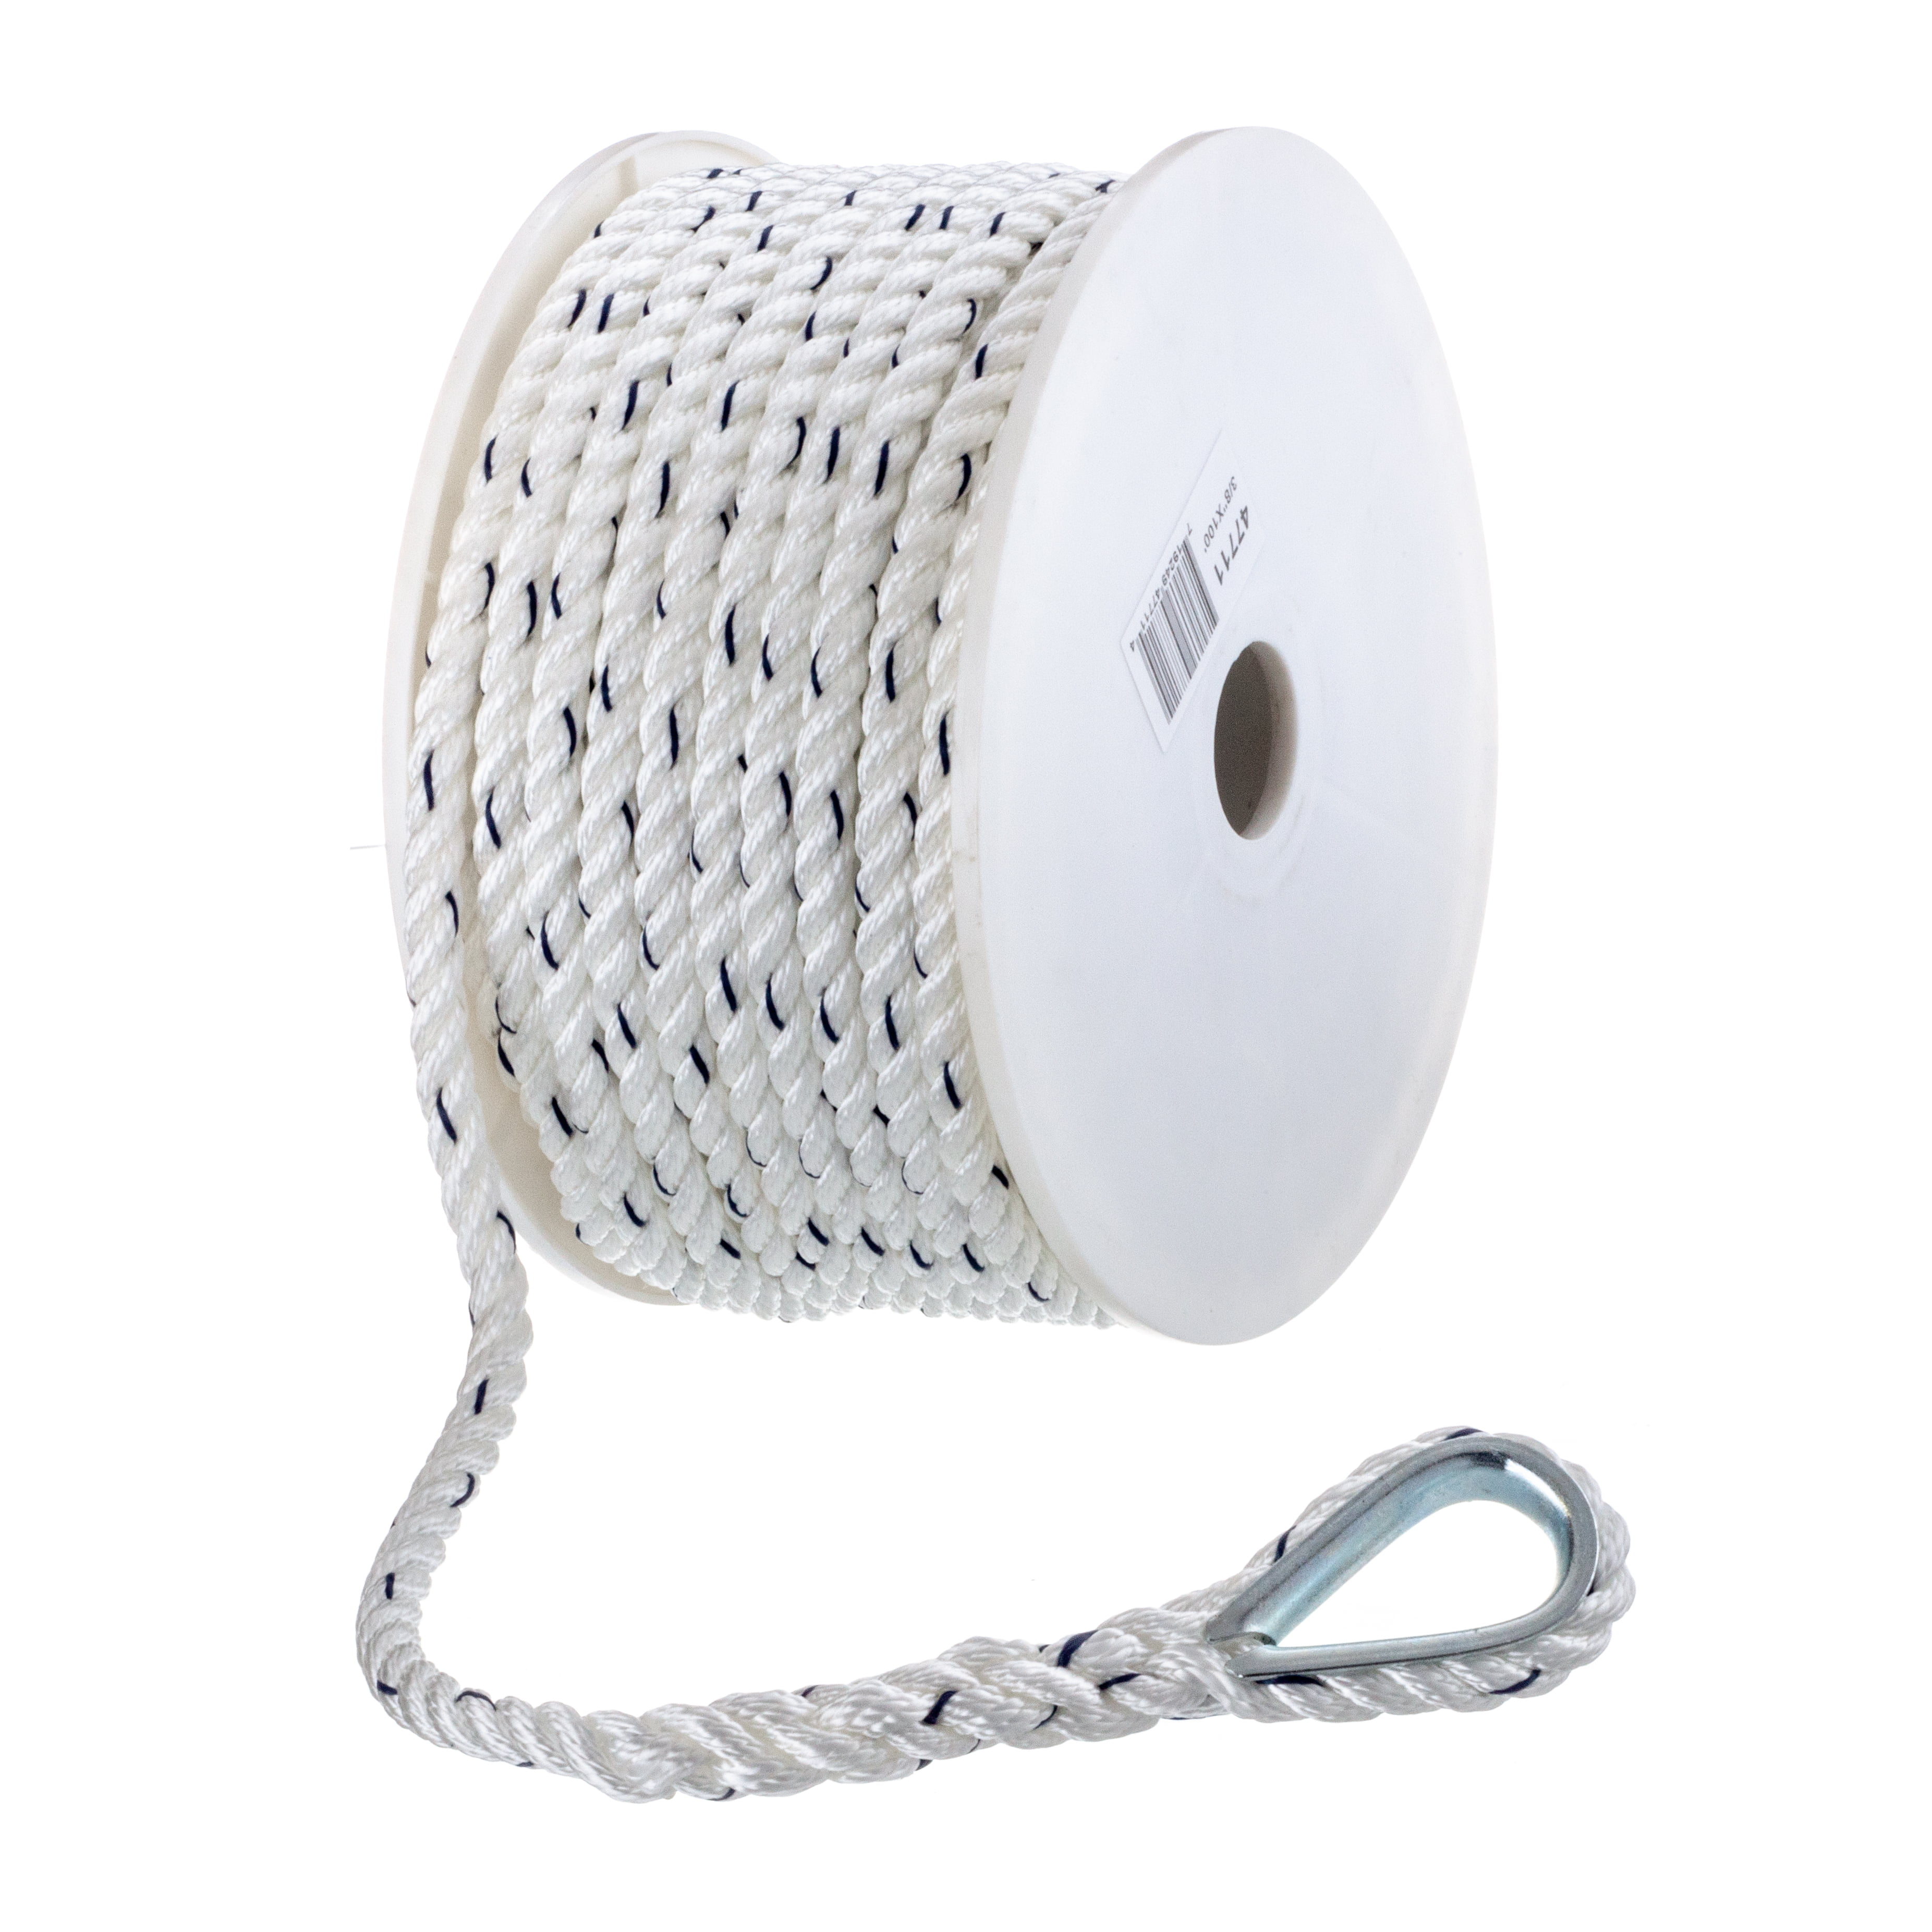 Seachoice 47711 Premium Anchor Rope for Boating - 3-Strand Twisted Nylon  Anchor Line,3/8 In. x 100 Ft. White/Blue